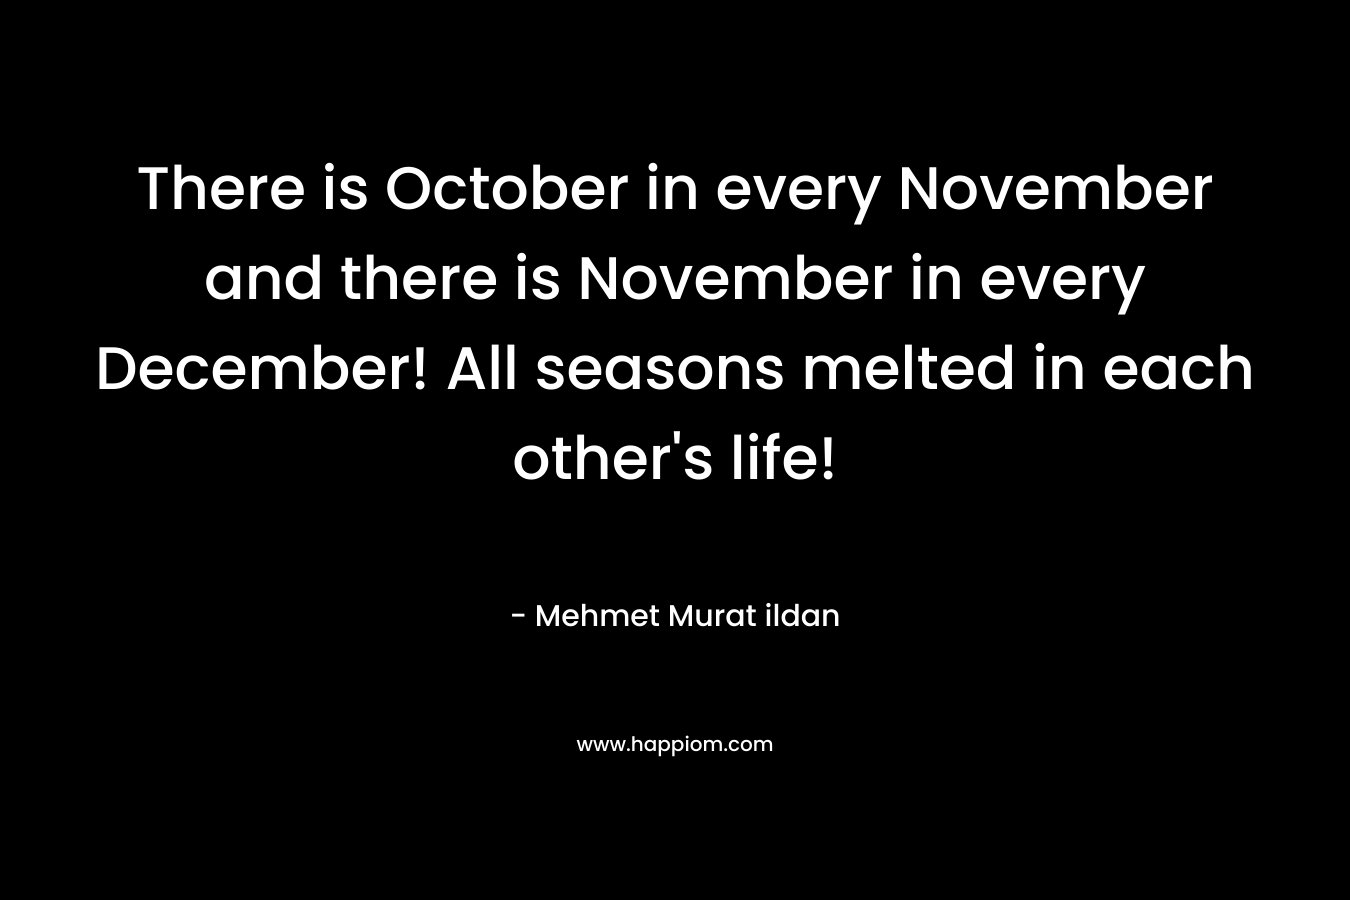 There is October in every November and there is November in every December! All seasons melted in each other's life!